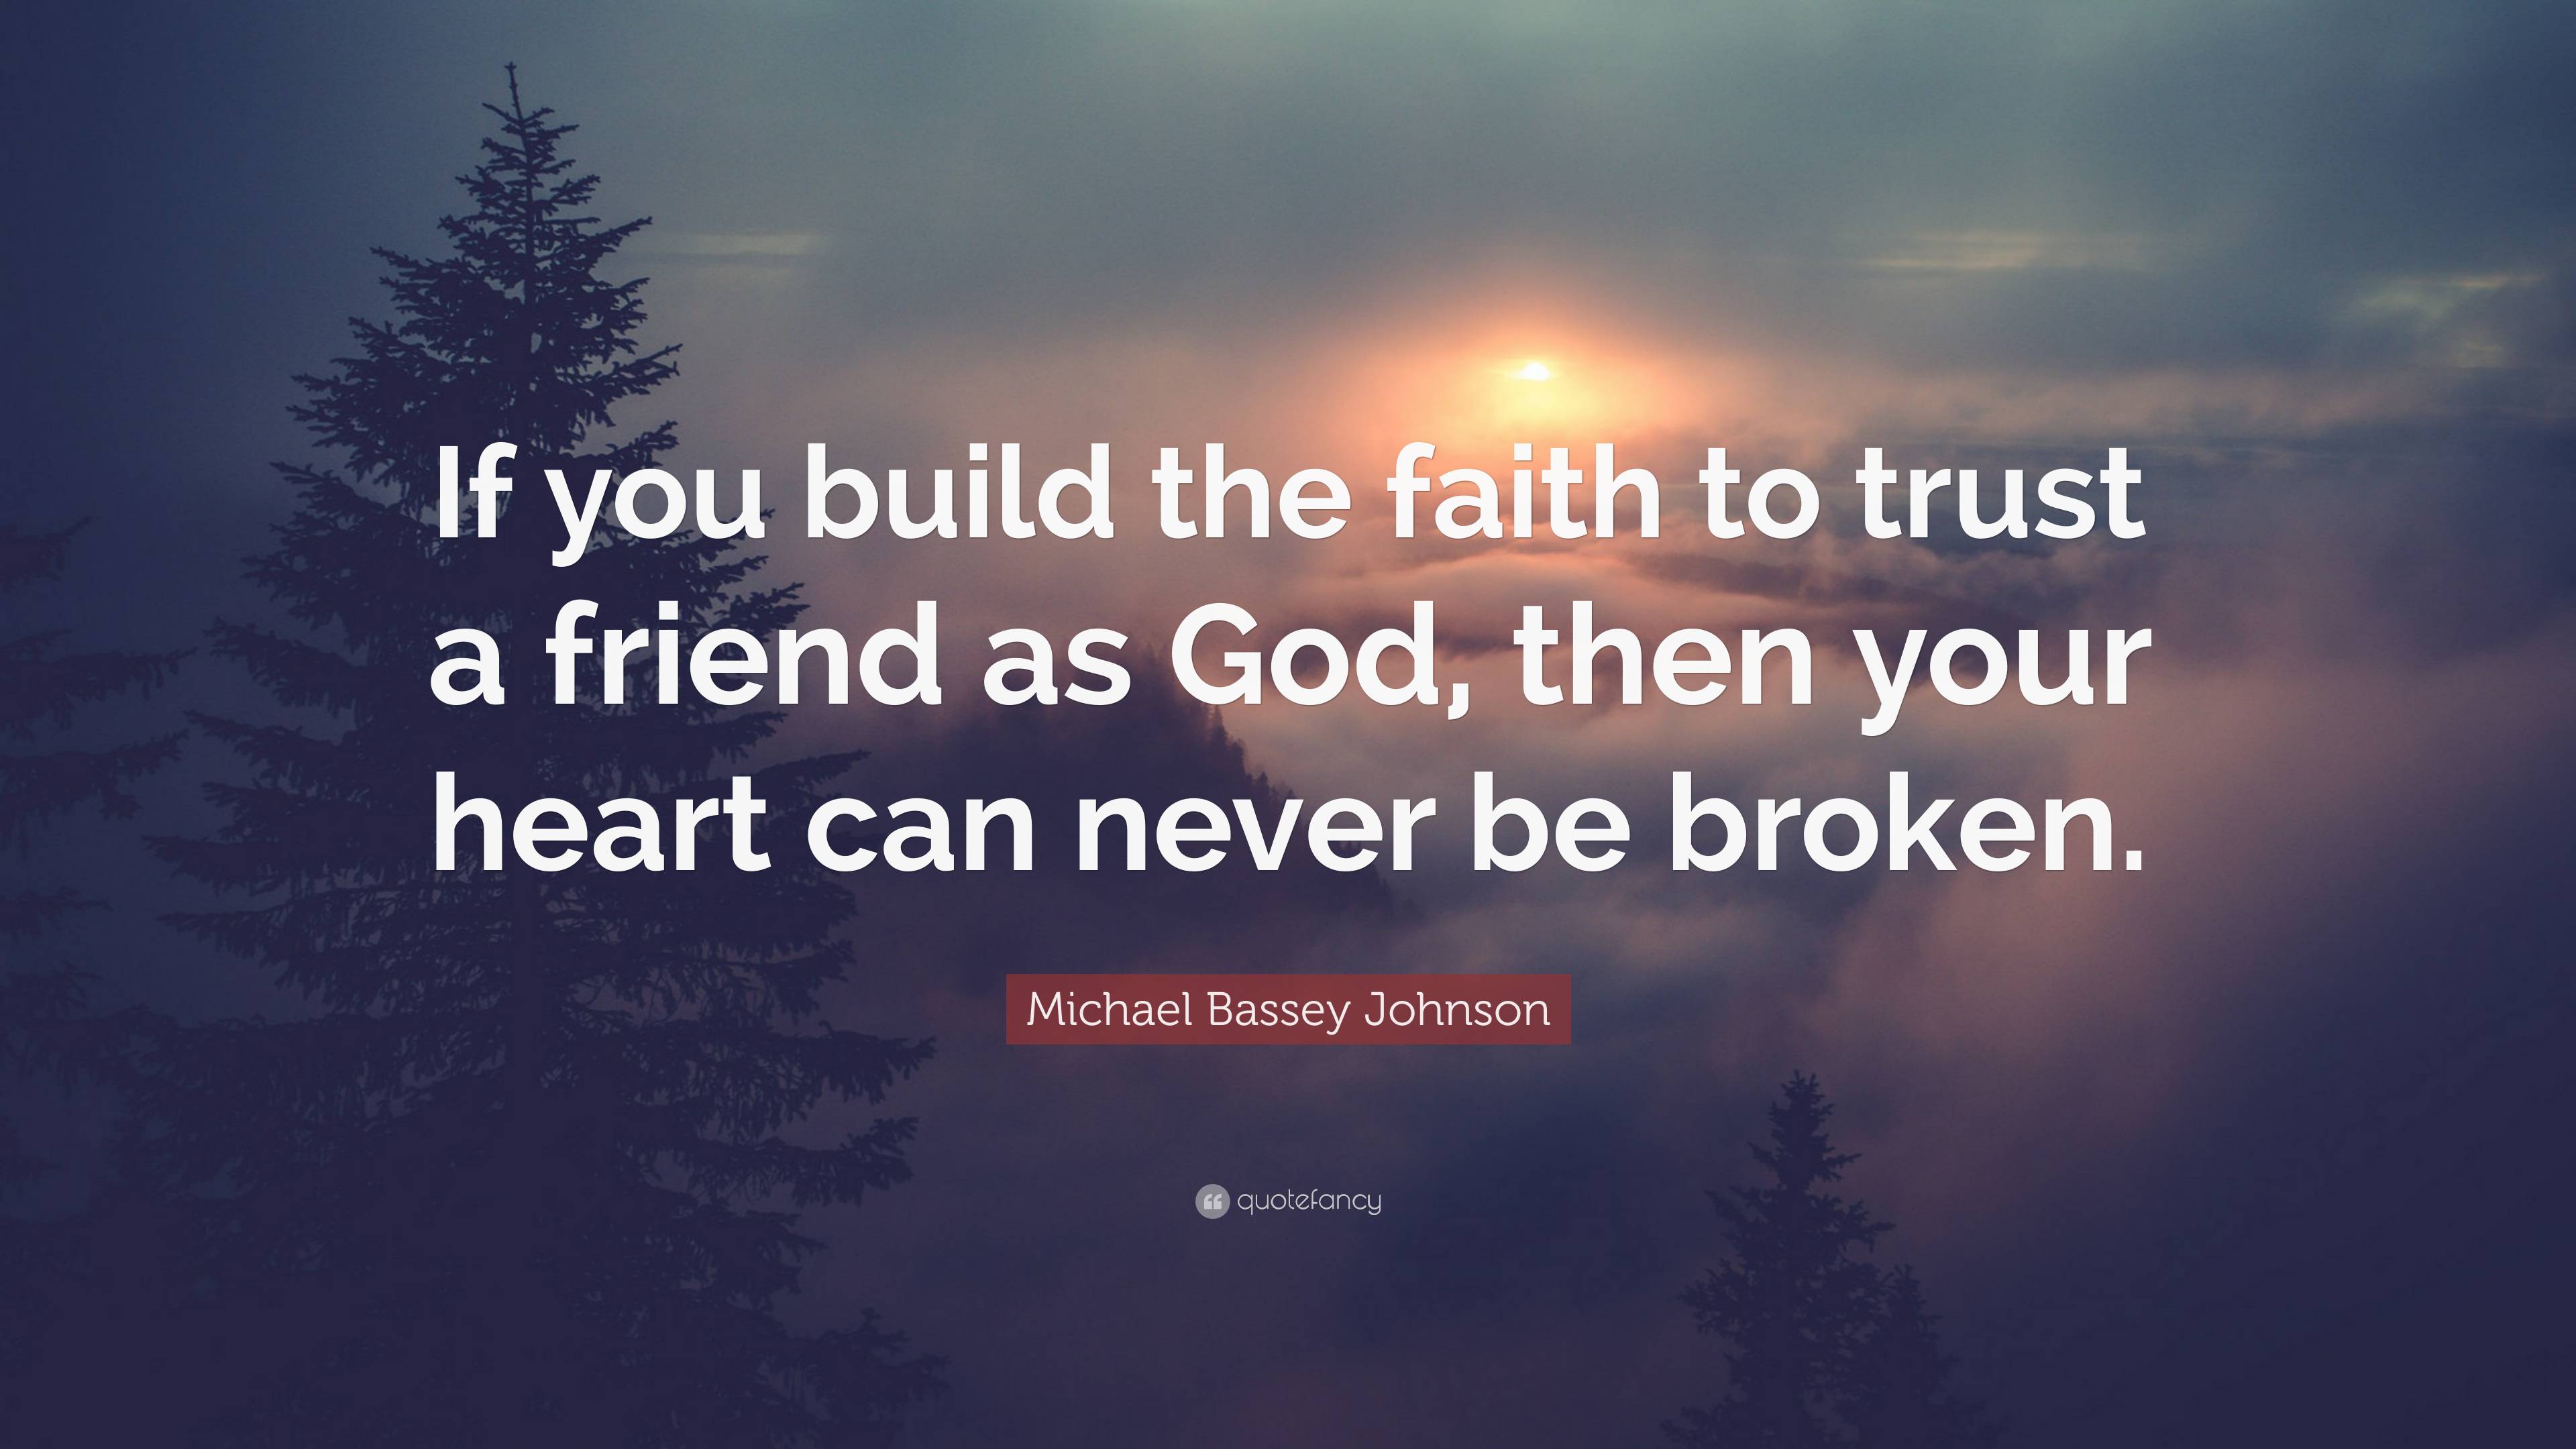 Michael Bassey Johnson Quote: “If you build the faith to trust a friend ...